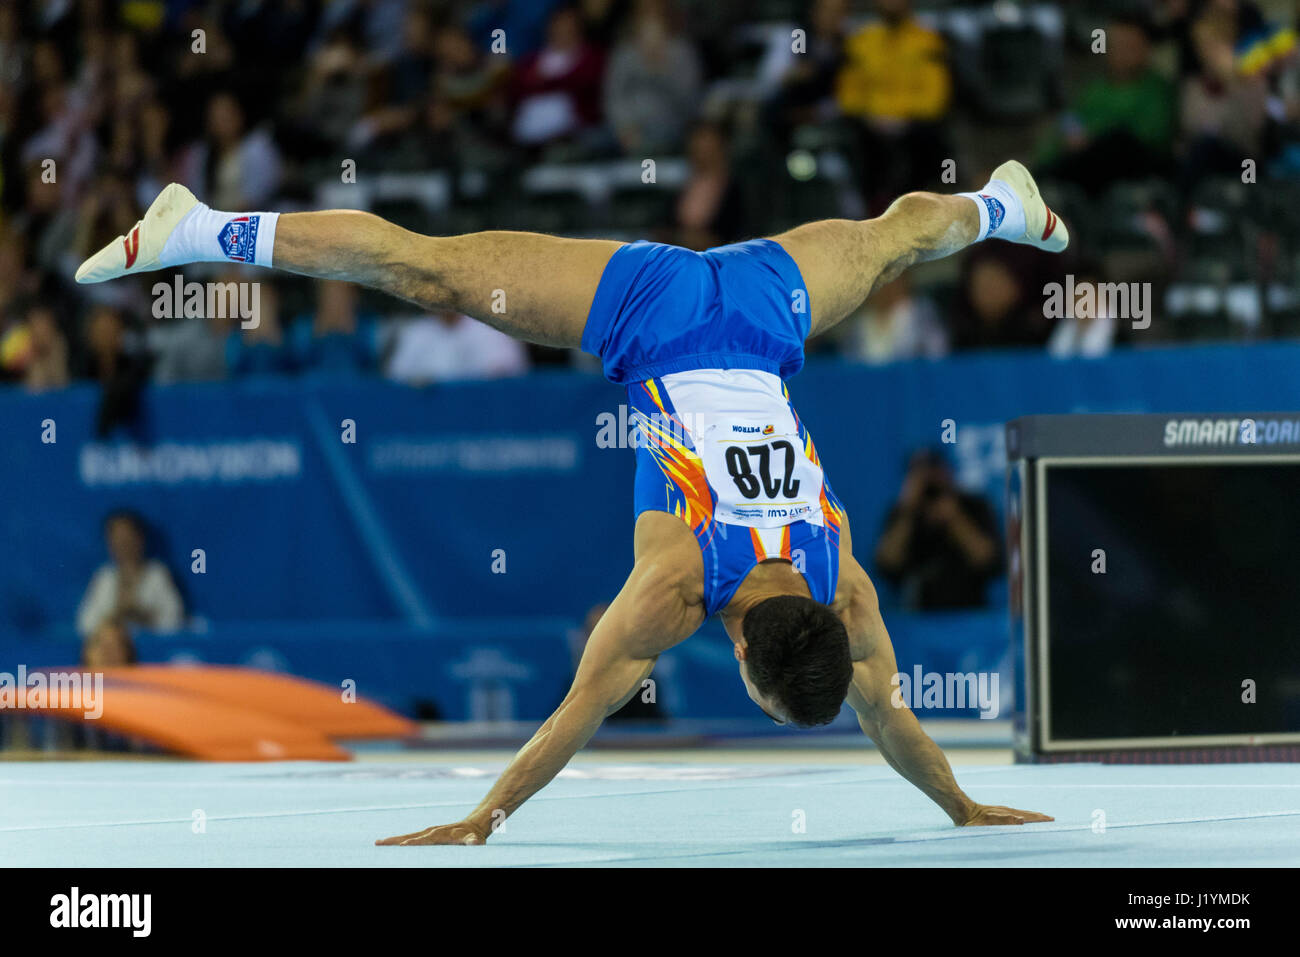 Marian Dragulescu (ROU) performs on the floor during the Men's Apparatus Finals at the European Men's and Women's Artistic Gymnastics Championships in Cluj Napoca, Romania. 22.04.2017 Photo: Catalin Soare/dpa Stock Photo